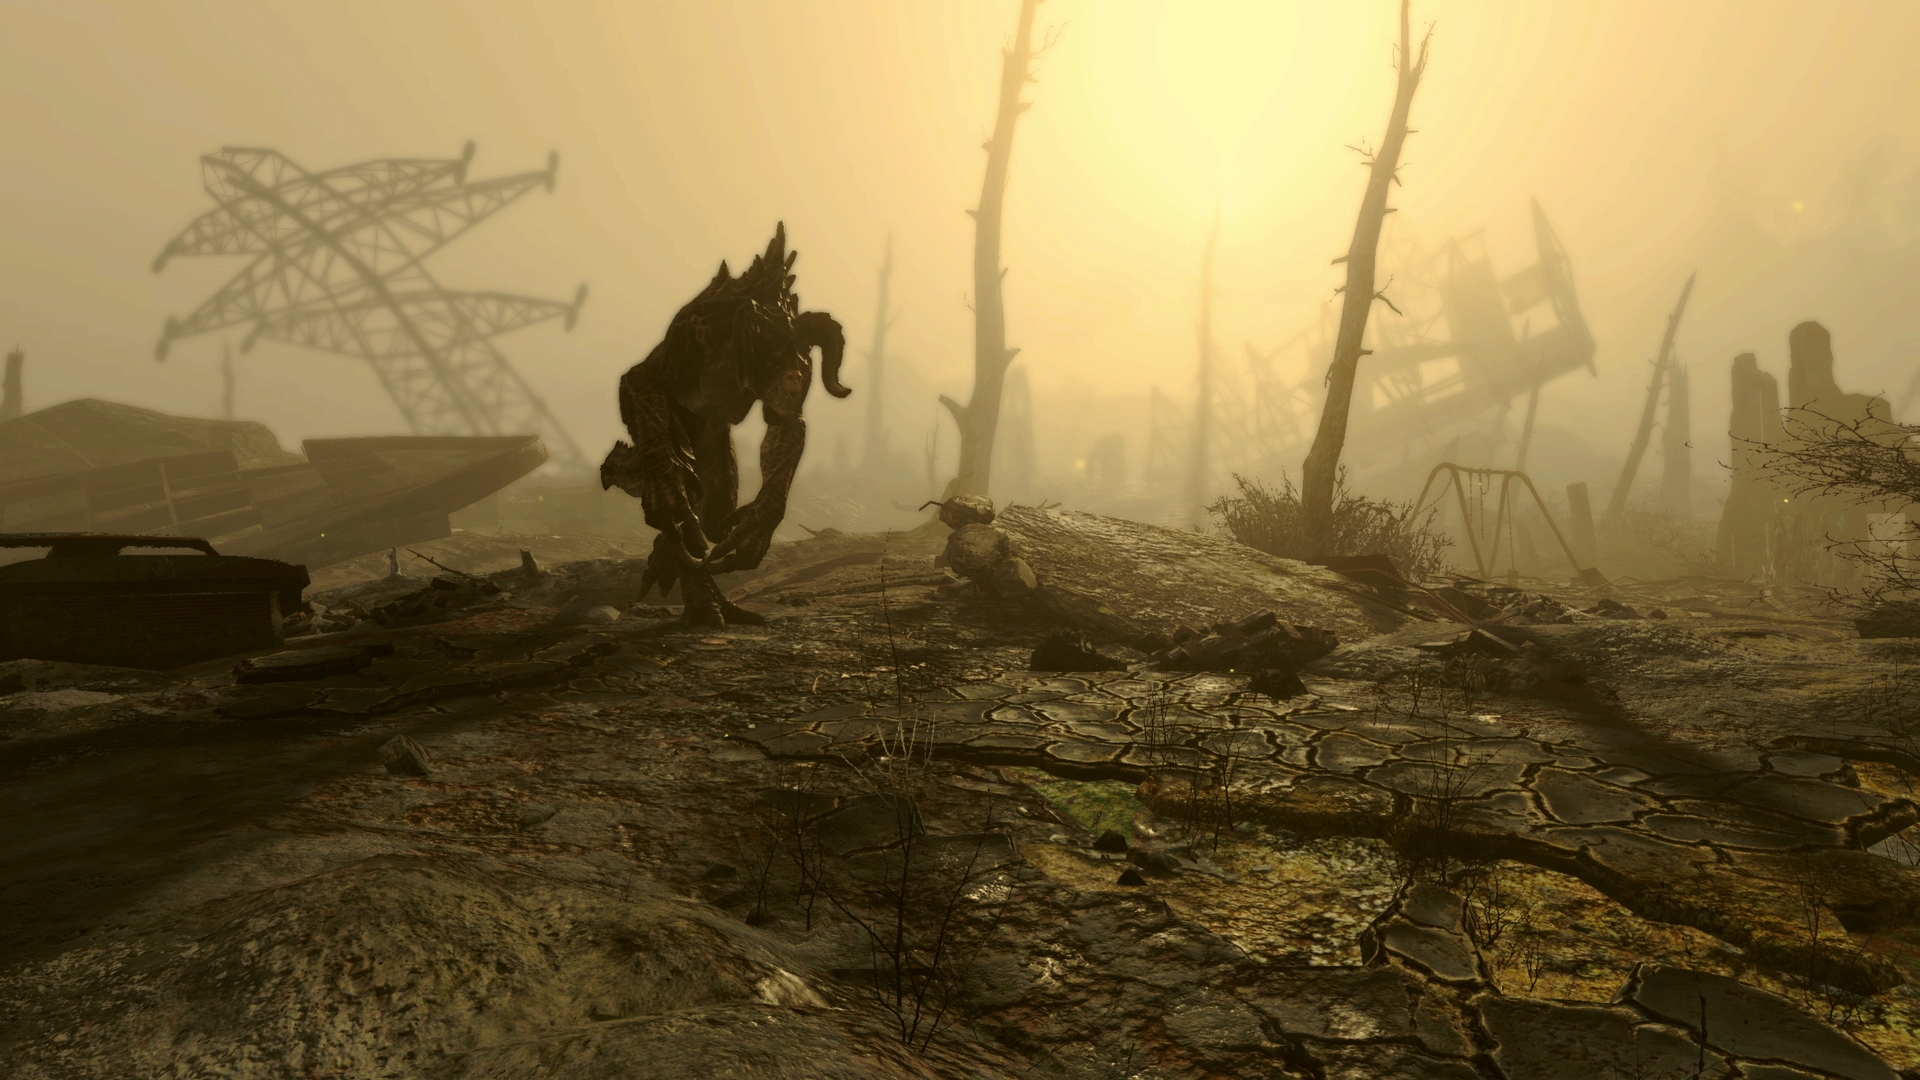 Fallout 4 is 1080p/30FPS on Consoles, PC Version is Not Restricted